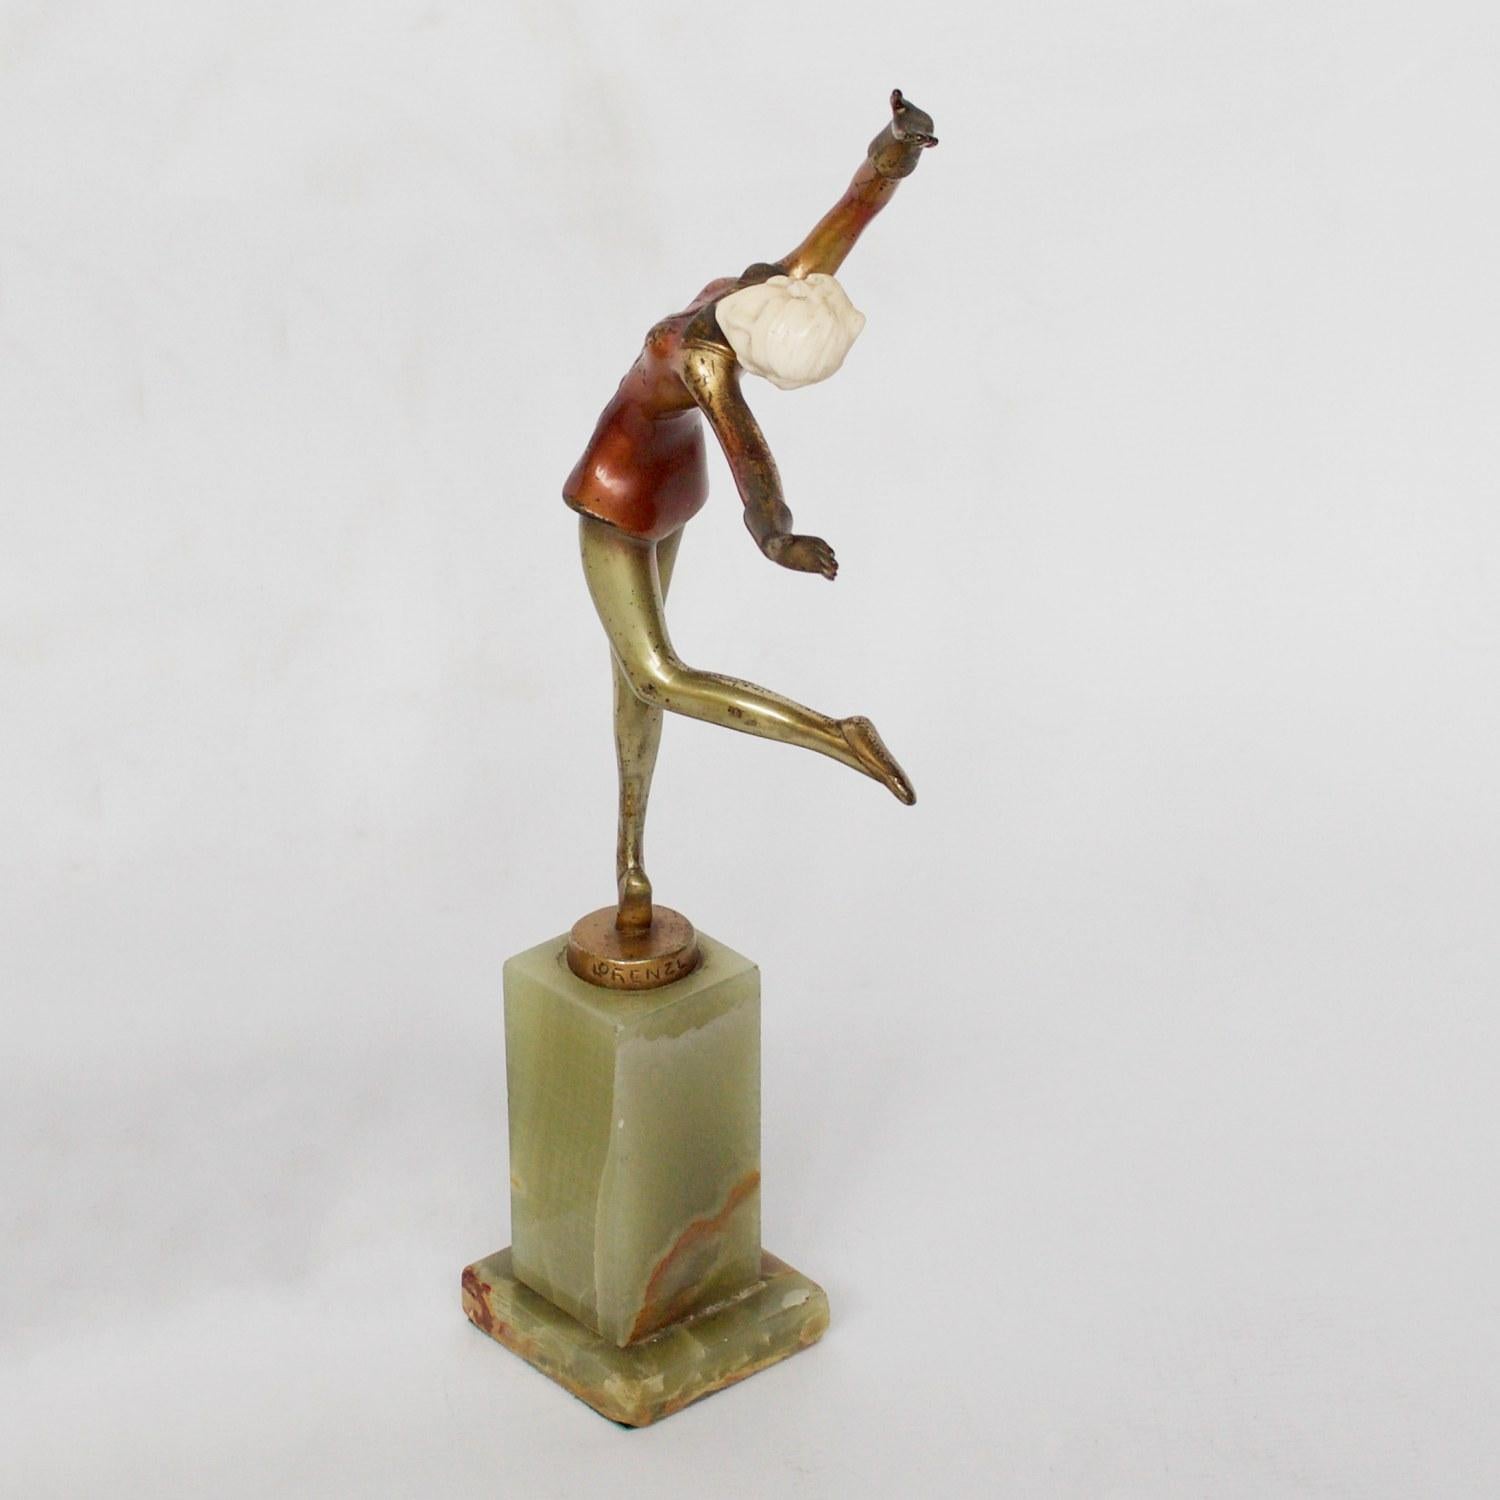 An Art Deco, cold painted bronze figure of an elegant dancer dressed in a buttoned red jacket, arms out stretched in an extravagant pose. Hand carved ivory head, raised on a green onyx base. Original enamel patination. 

Signed Lorenzl to